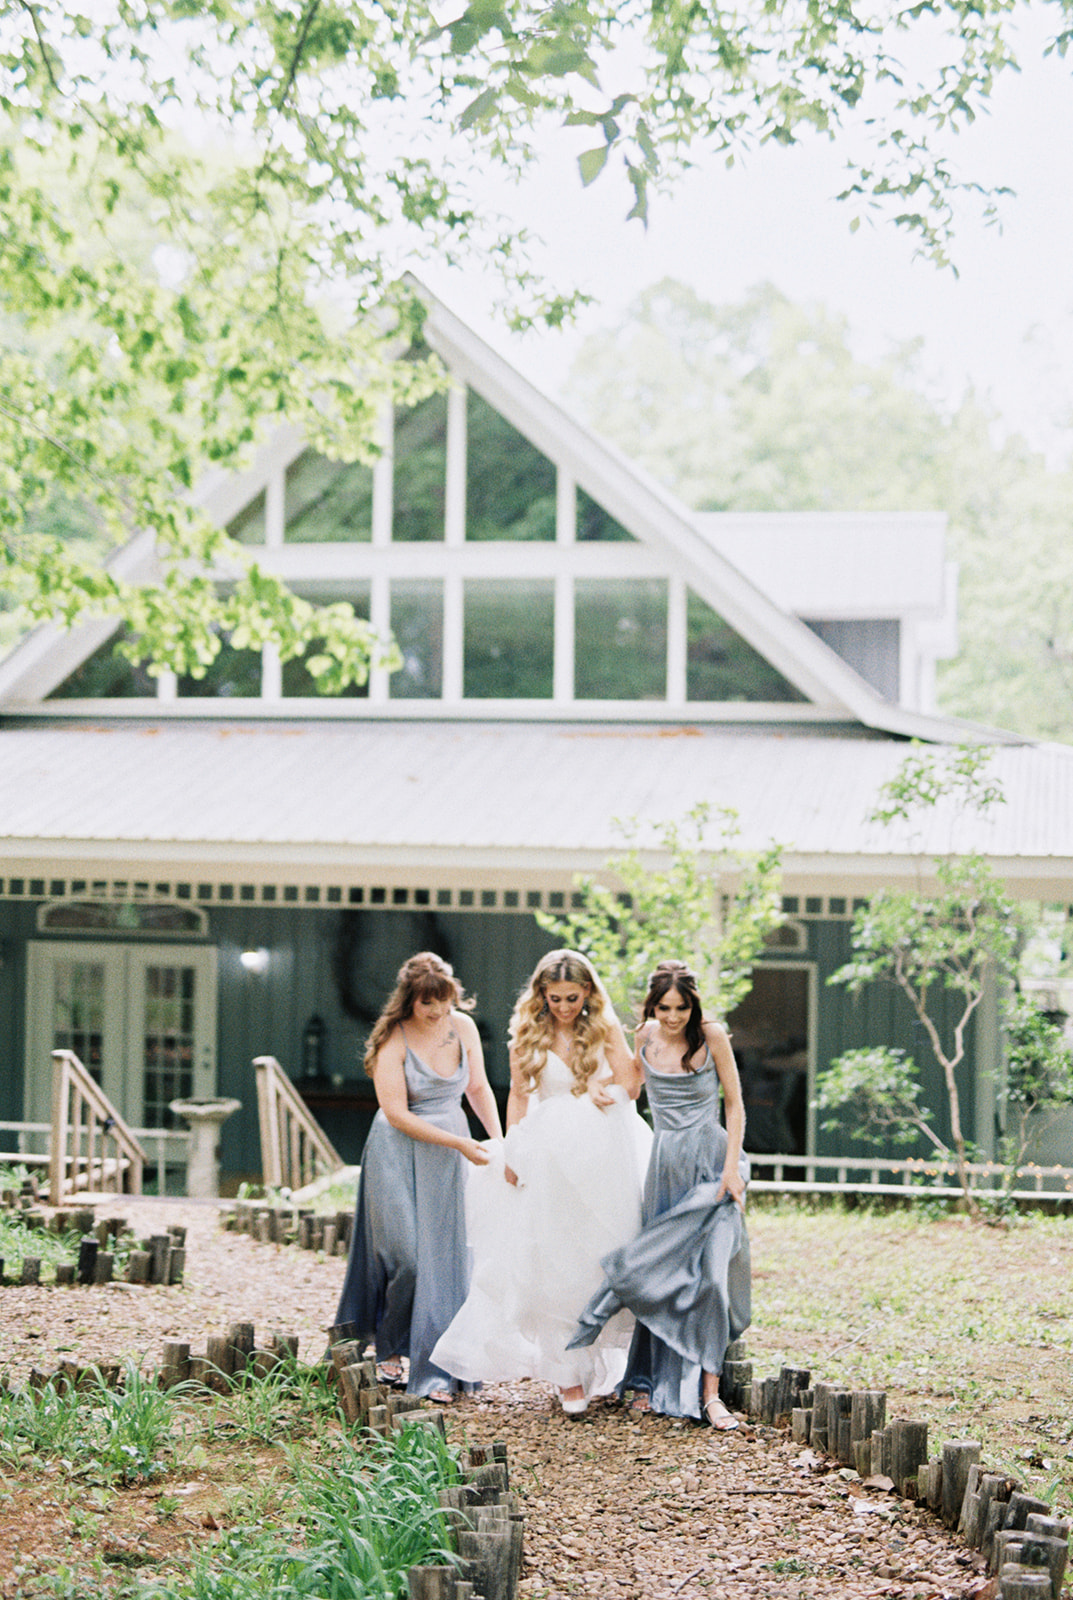 The bridesmaids help the bride get to the ceremony in the chapel at Fernwood of Mentone